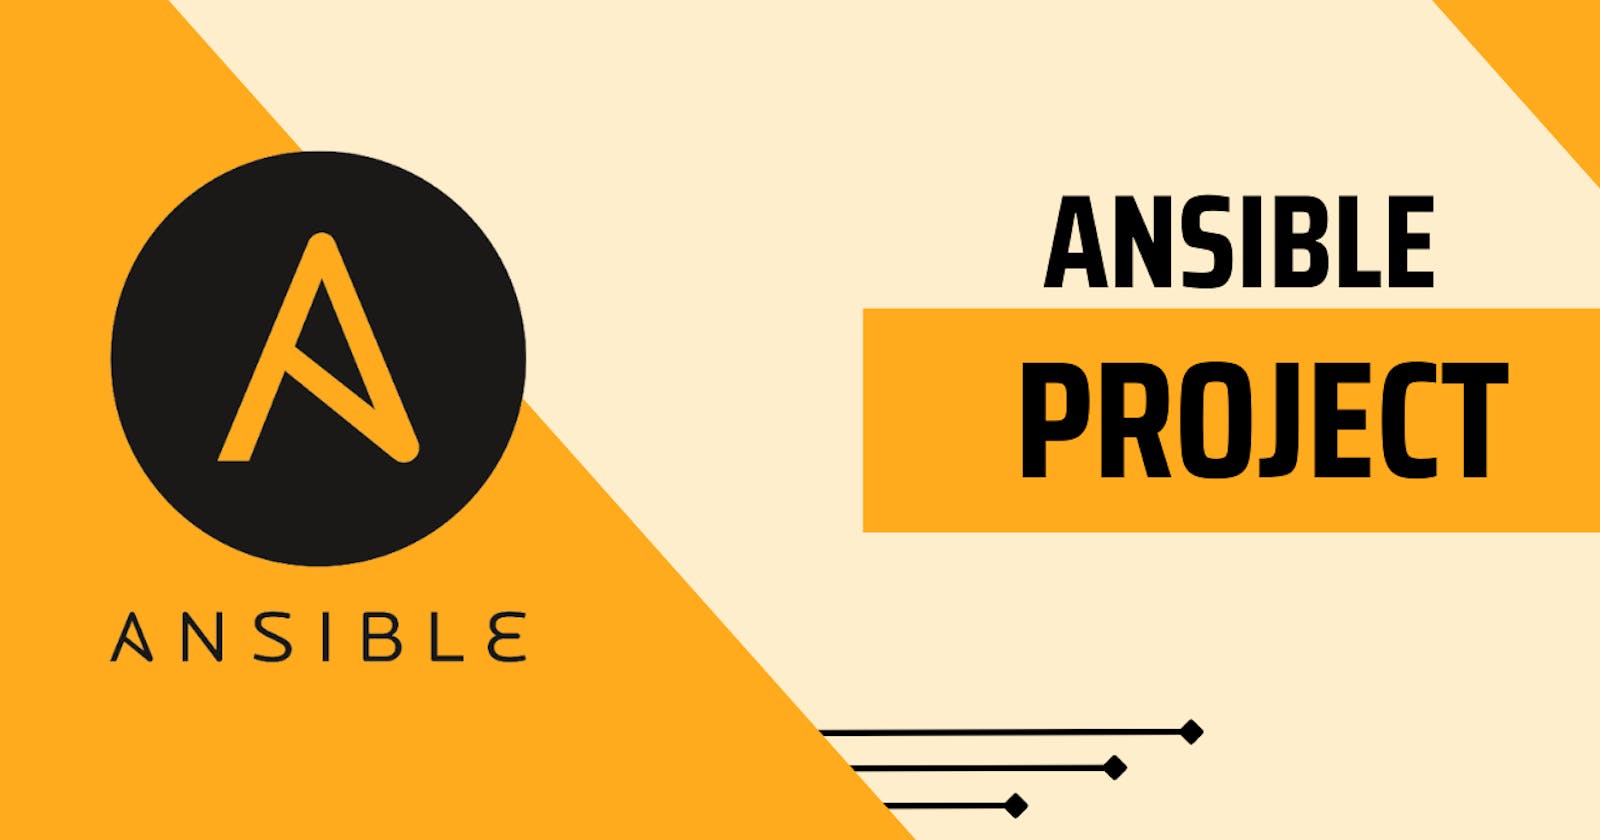 Ansible Project